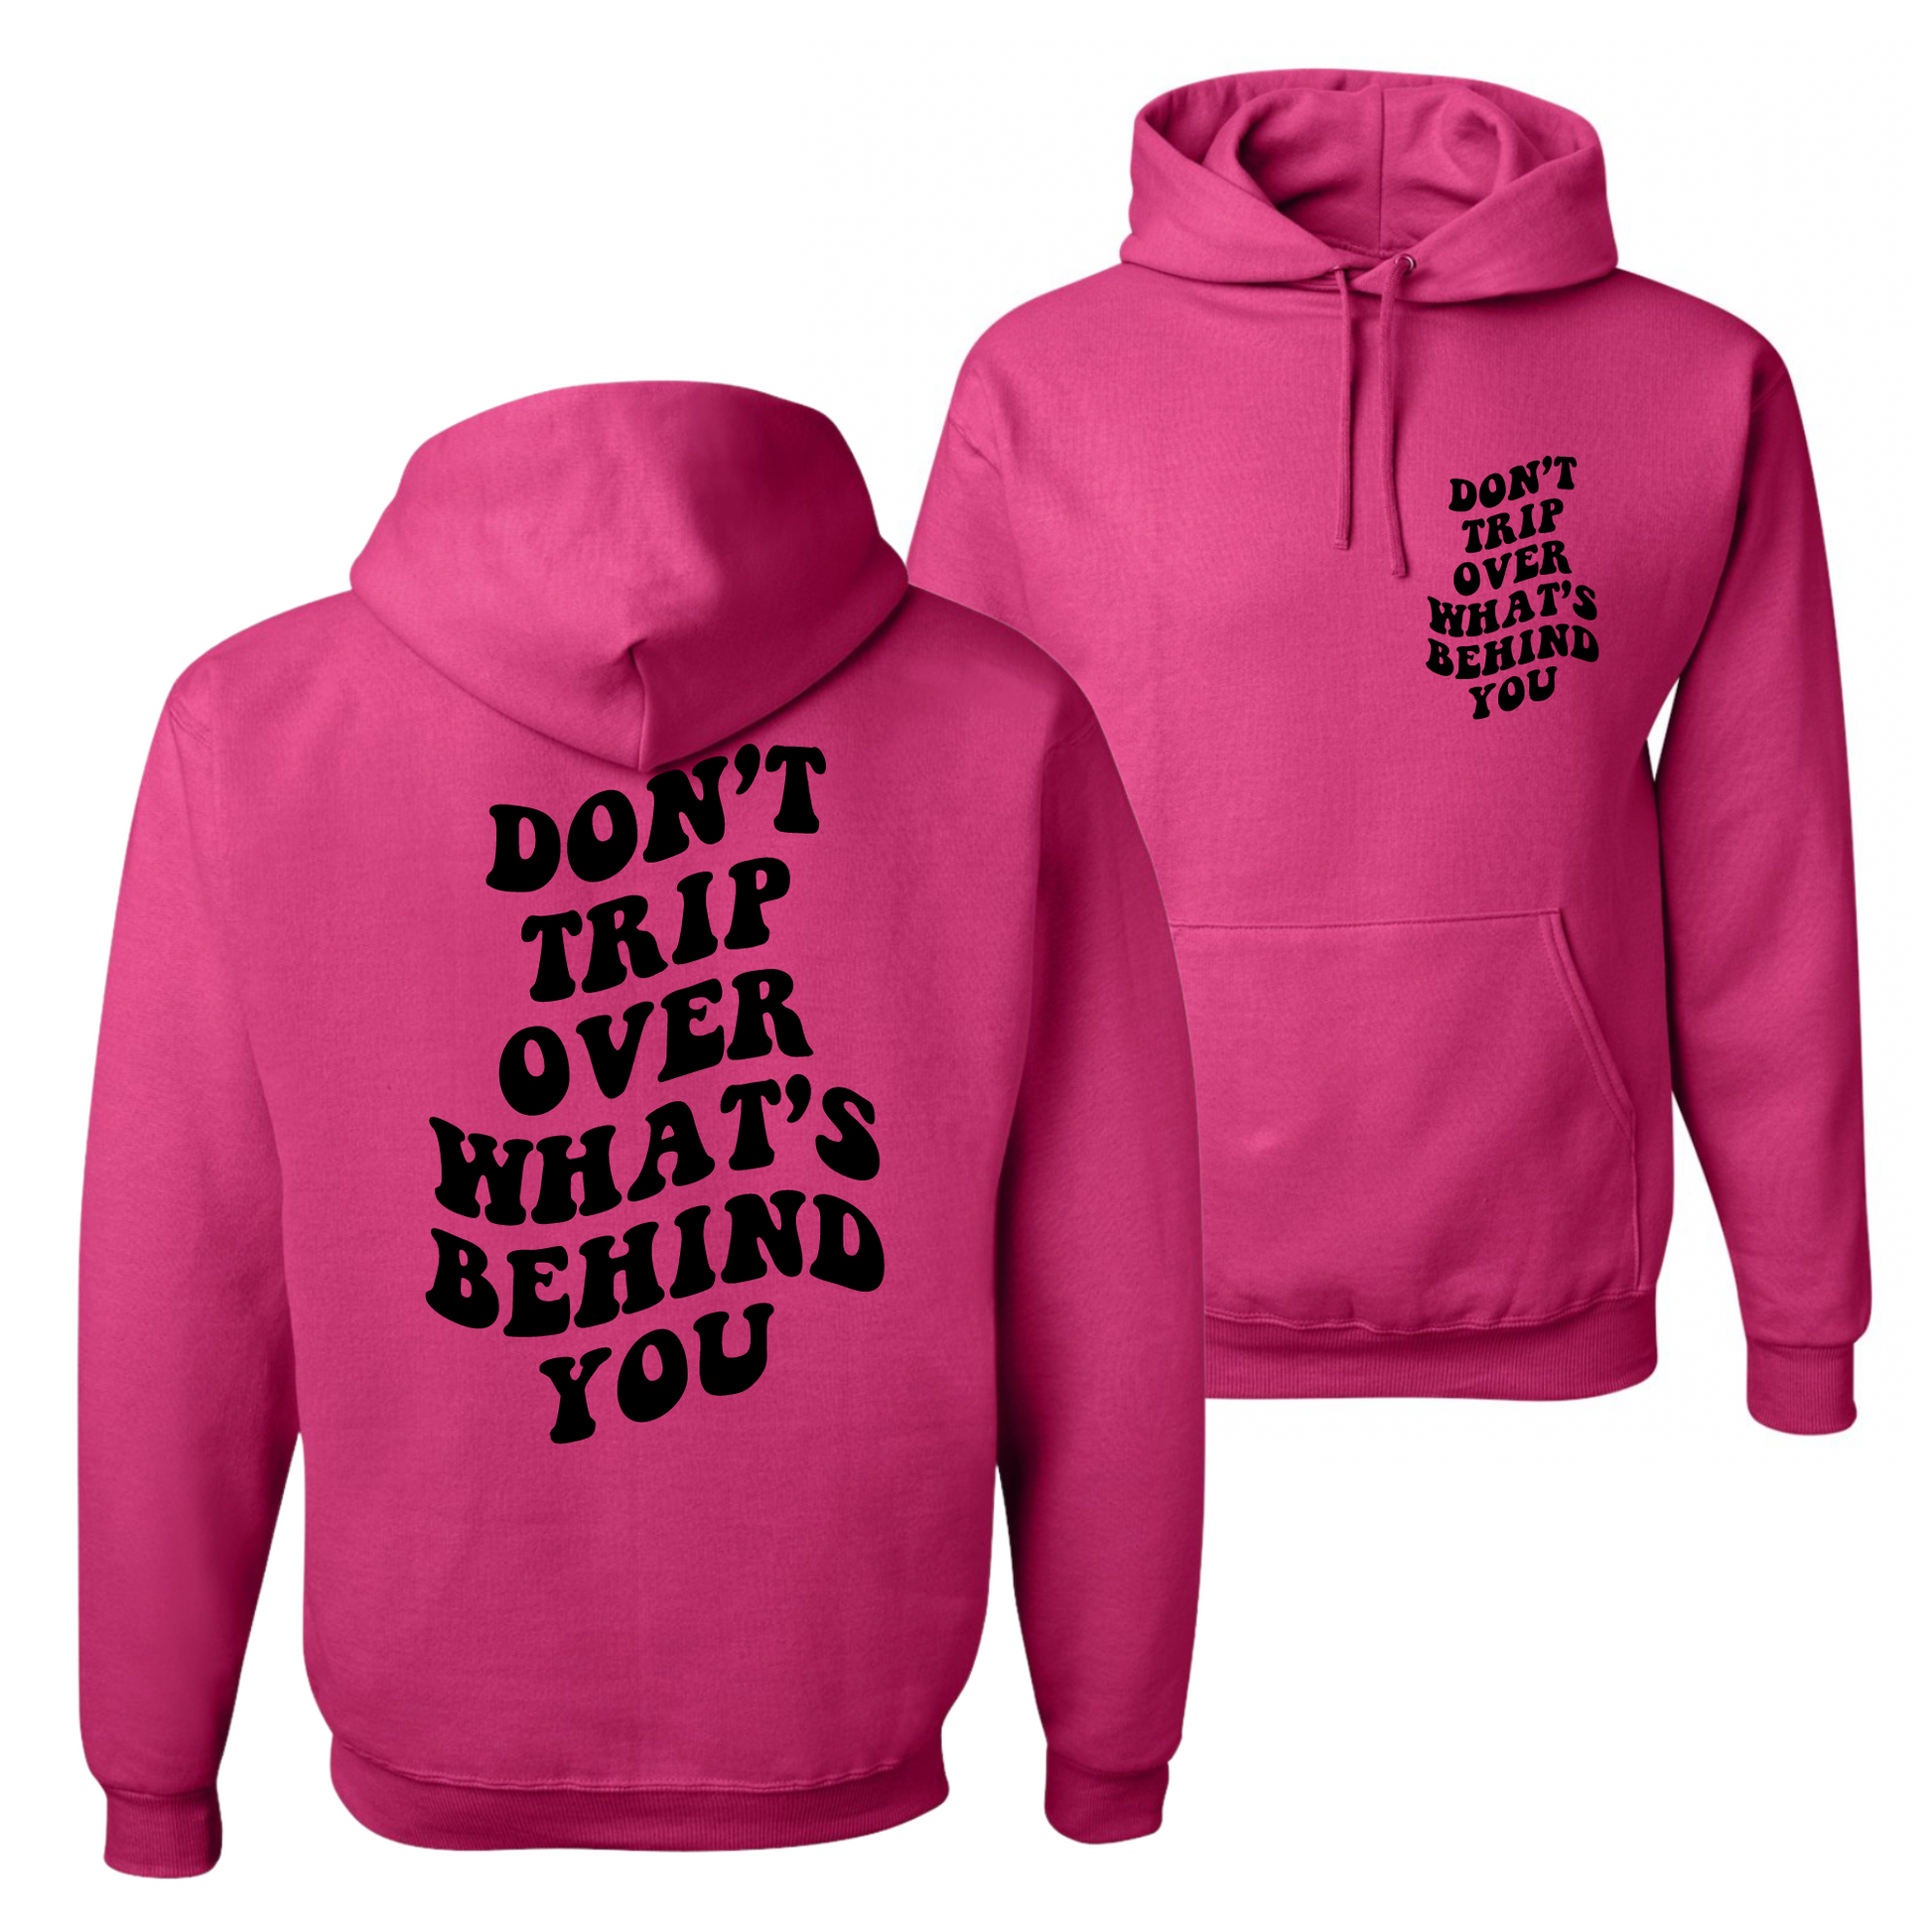 Resiliently Bold Don't Trip Over What's Behind You Cyber Pink Hooded Sweatshirt